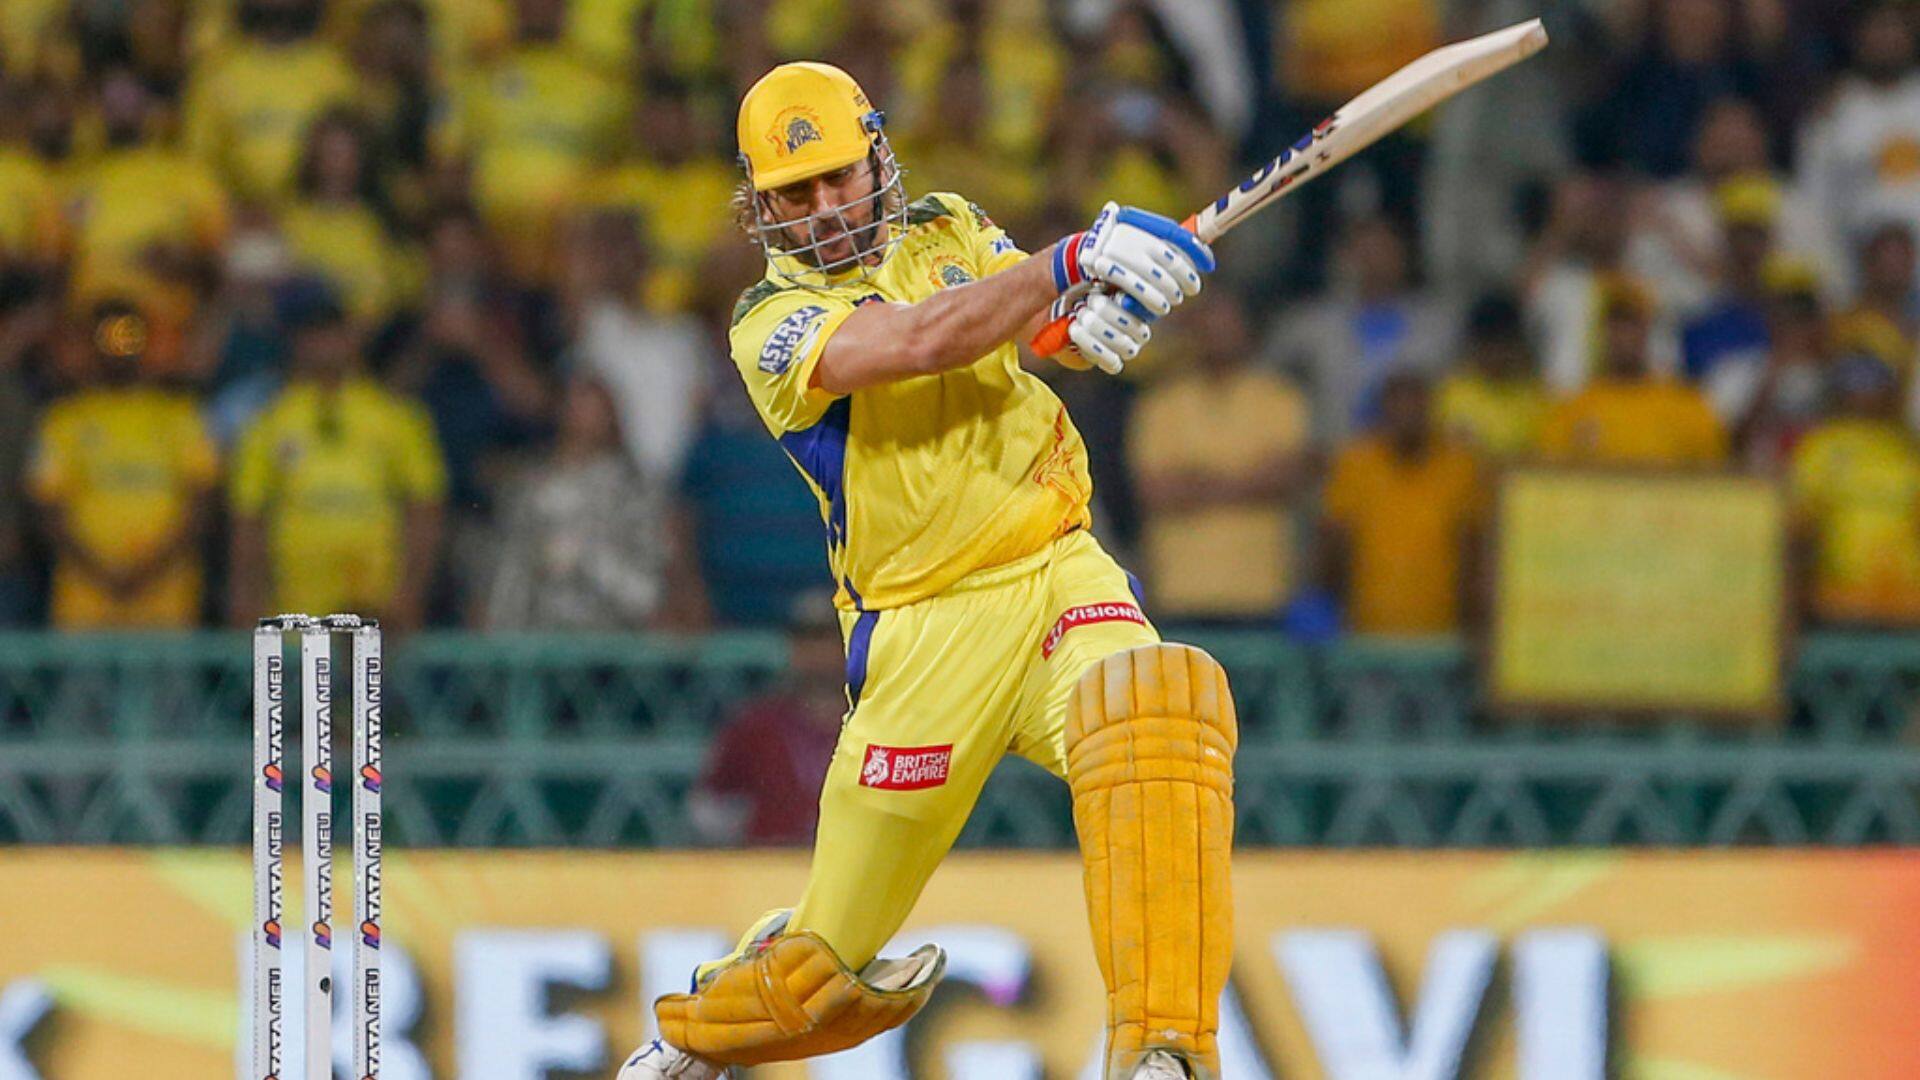 Dhoni hit a four on the only ball he faced [AP]